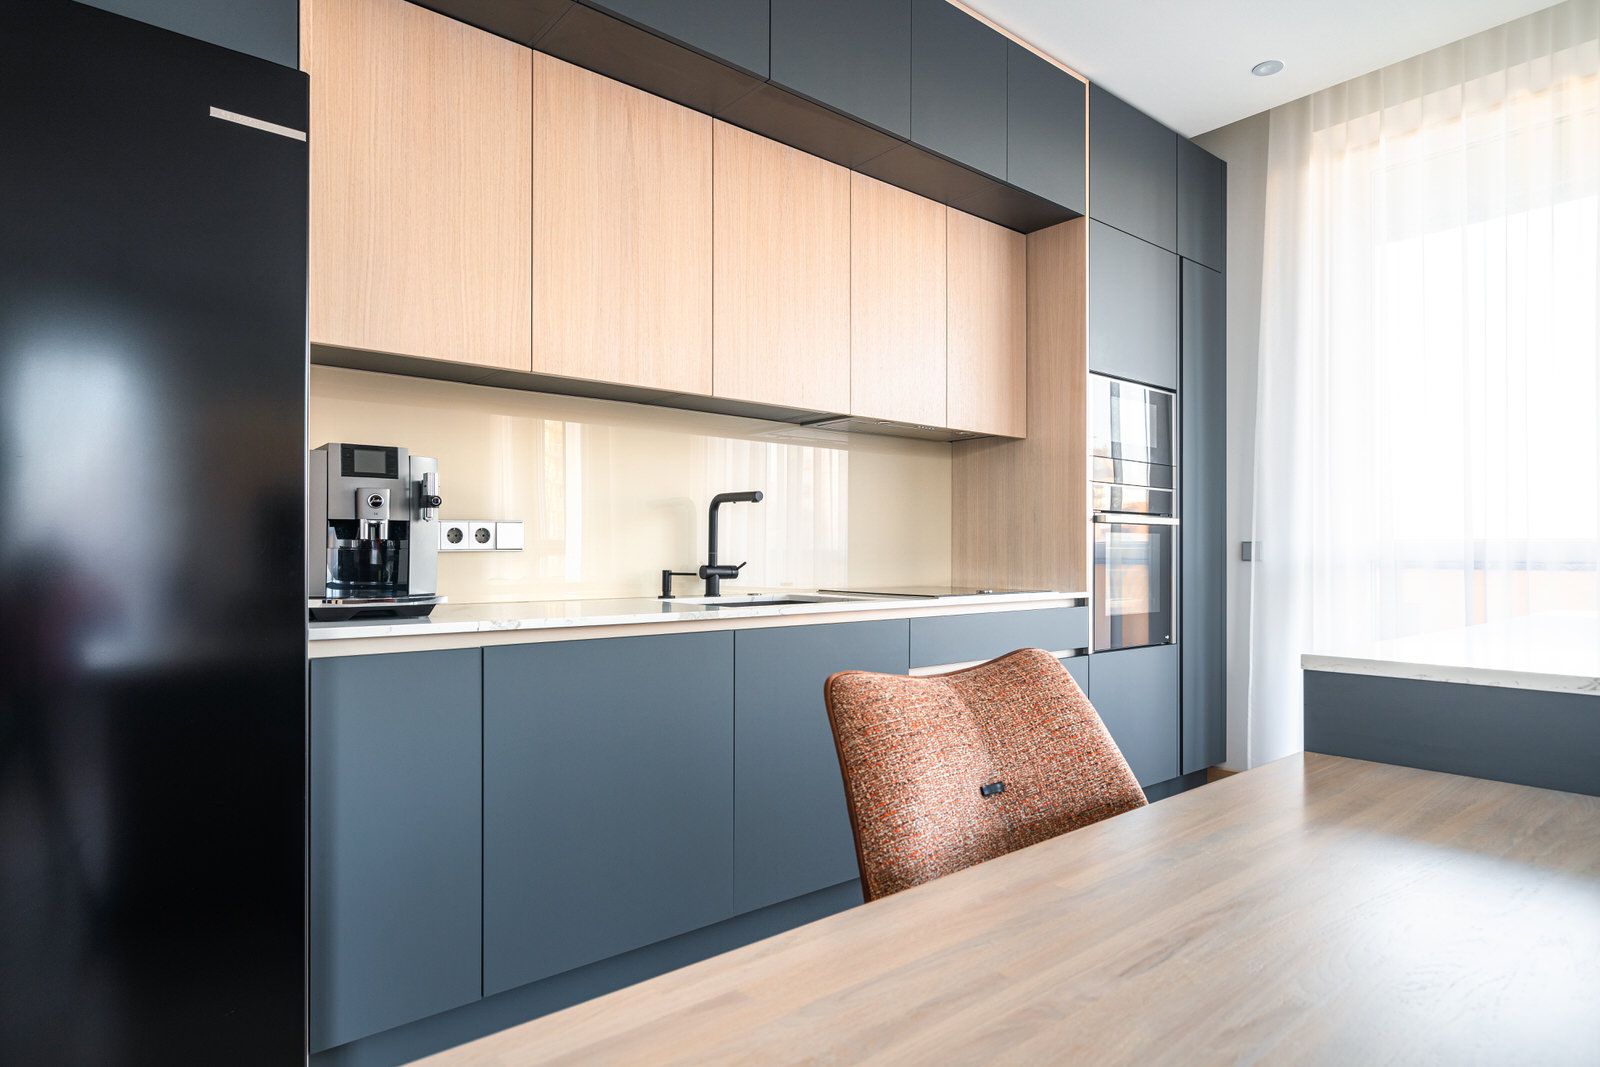 A preview of modern and elegant kitchen furniture in Skanstes, designed using premium materials